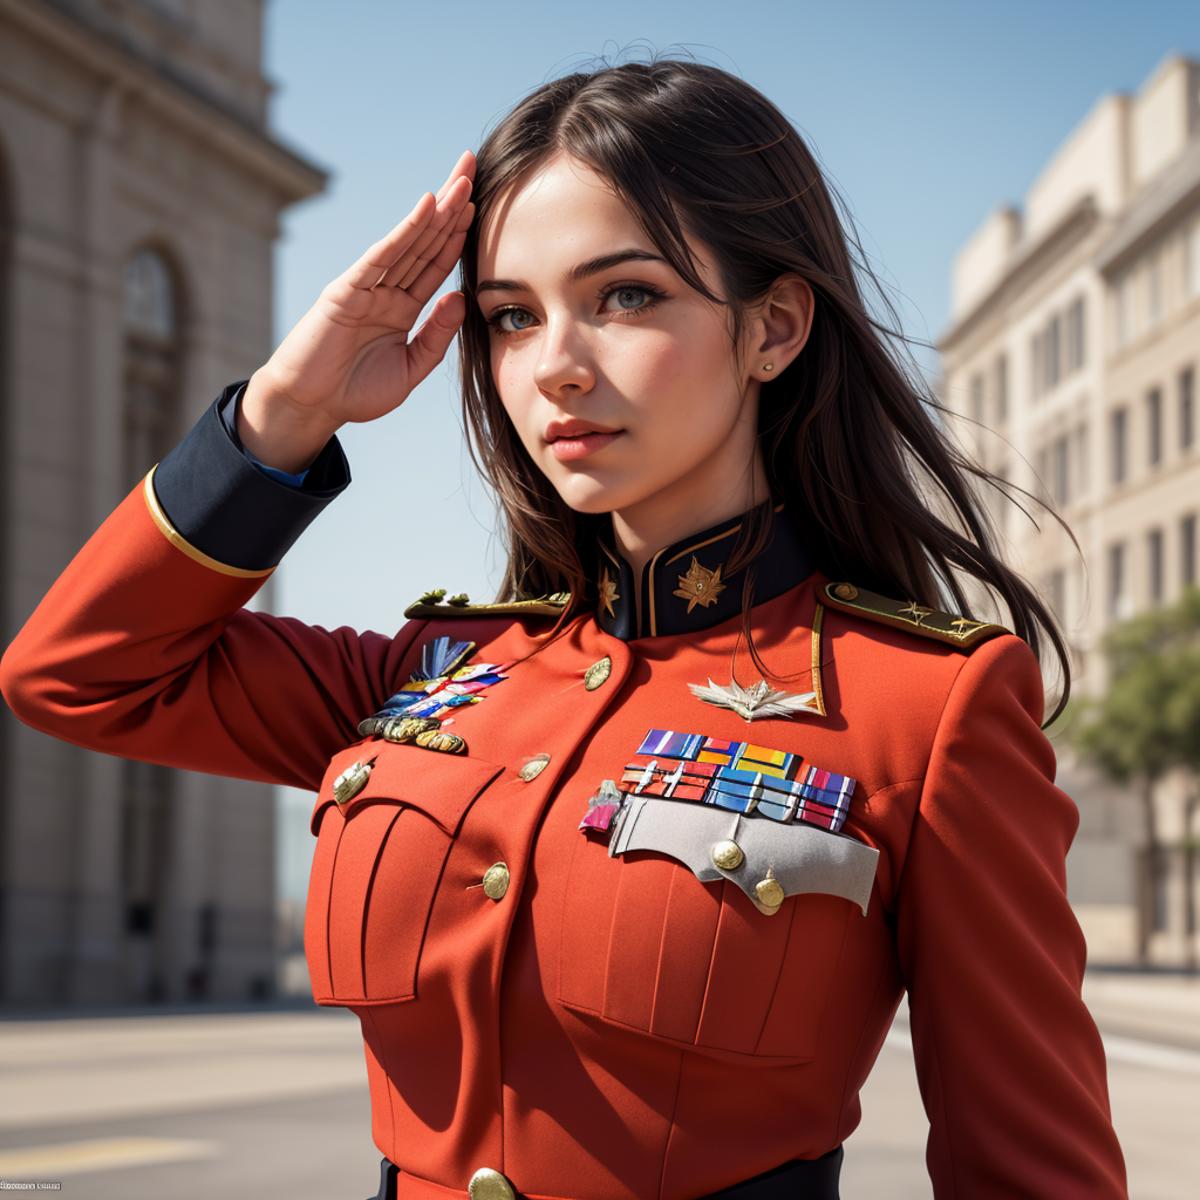 Woman in uniform saluting in front of a building.